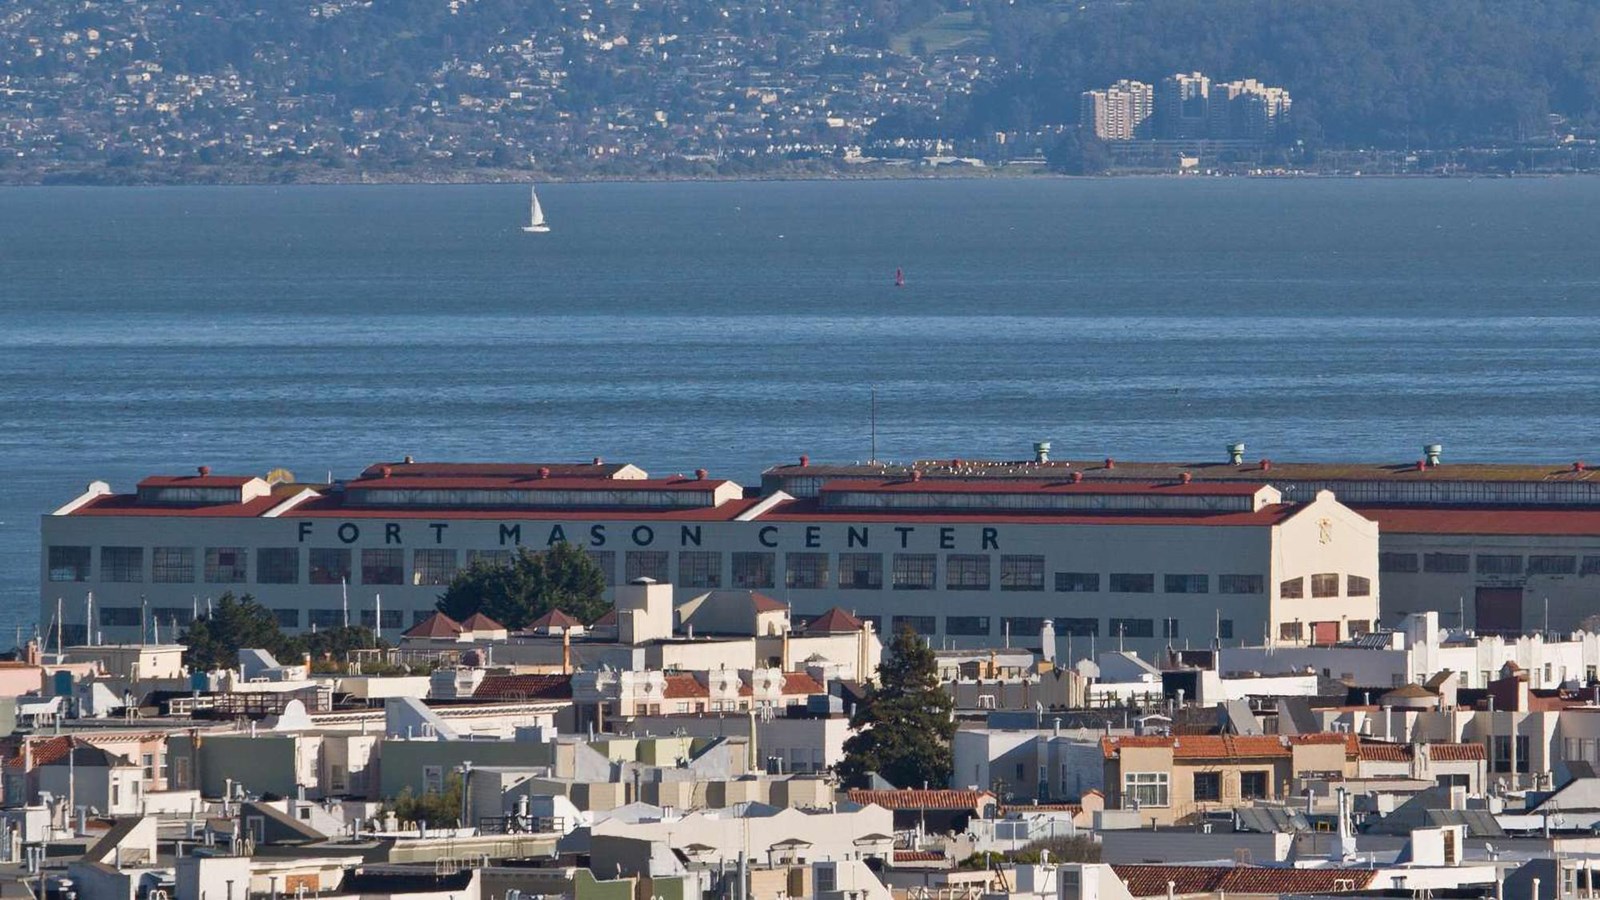 Fort Mason Center with the San Francisco Bay in the background